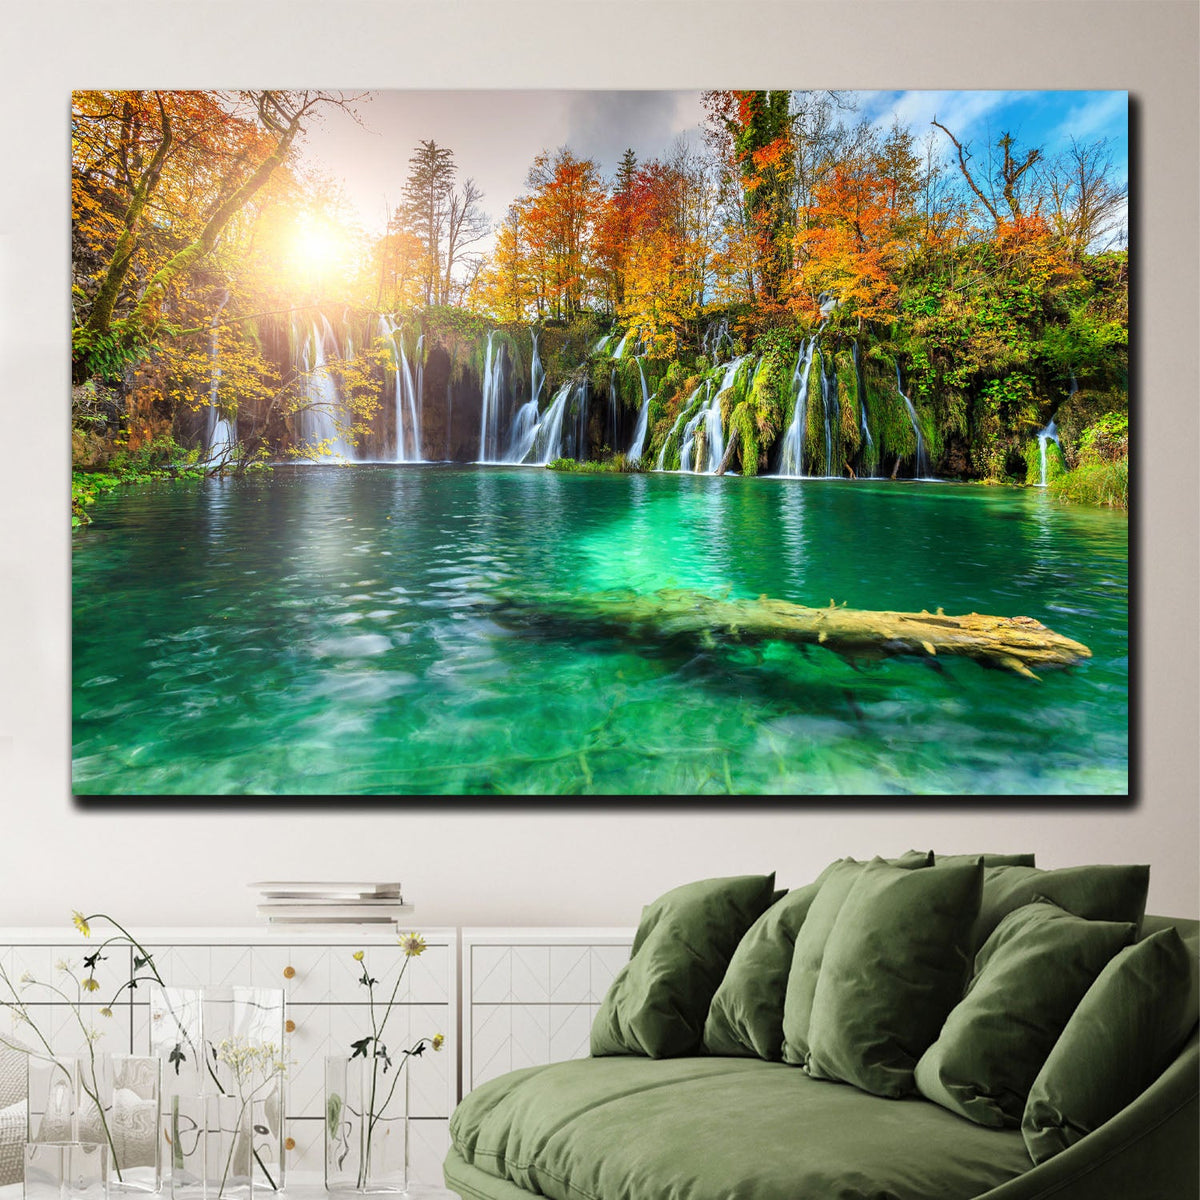 https://cdn.shopify.com/s/files/1/0387/9986/8044/products/CroatianAutumnCanvasArtprintStretched-2.jpg